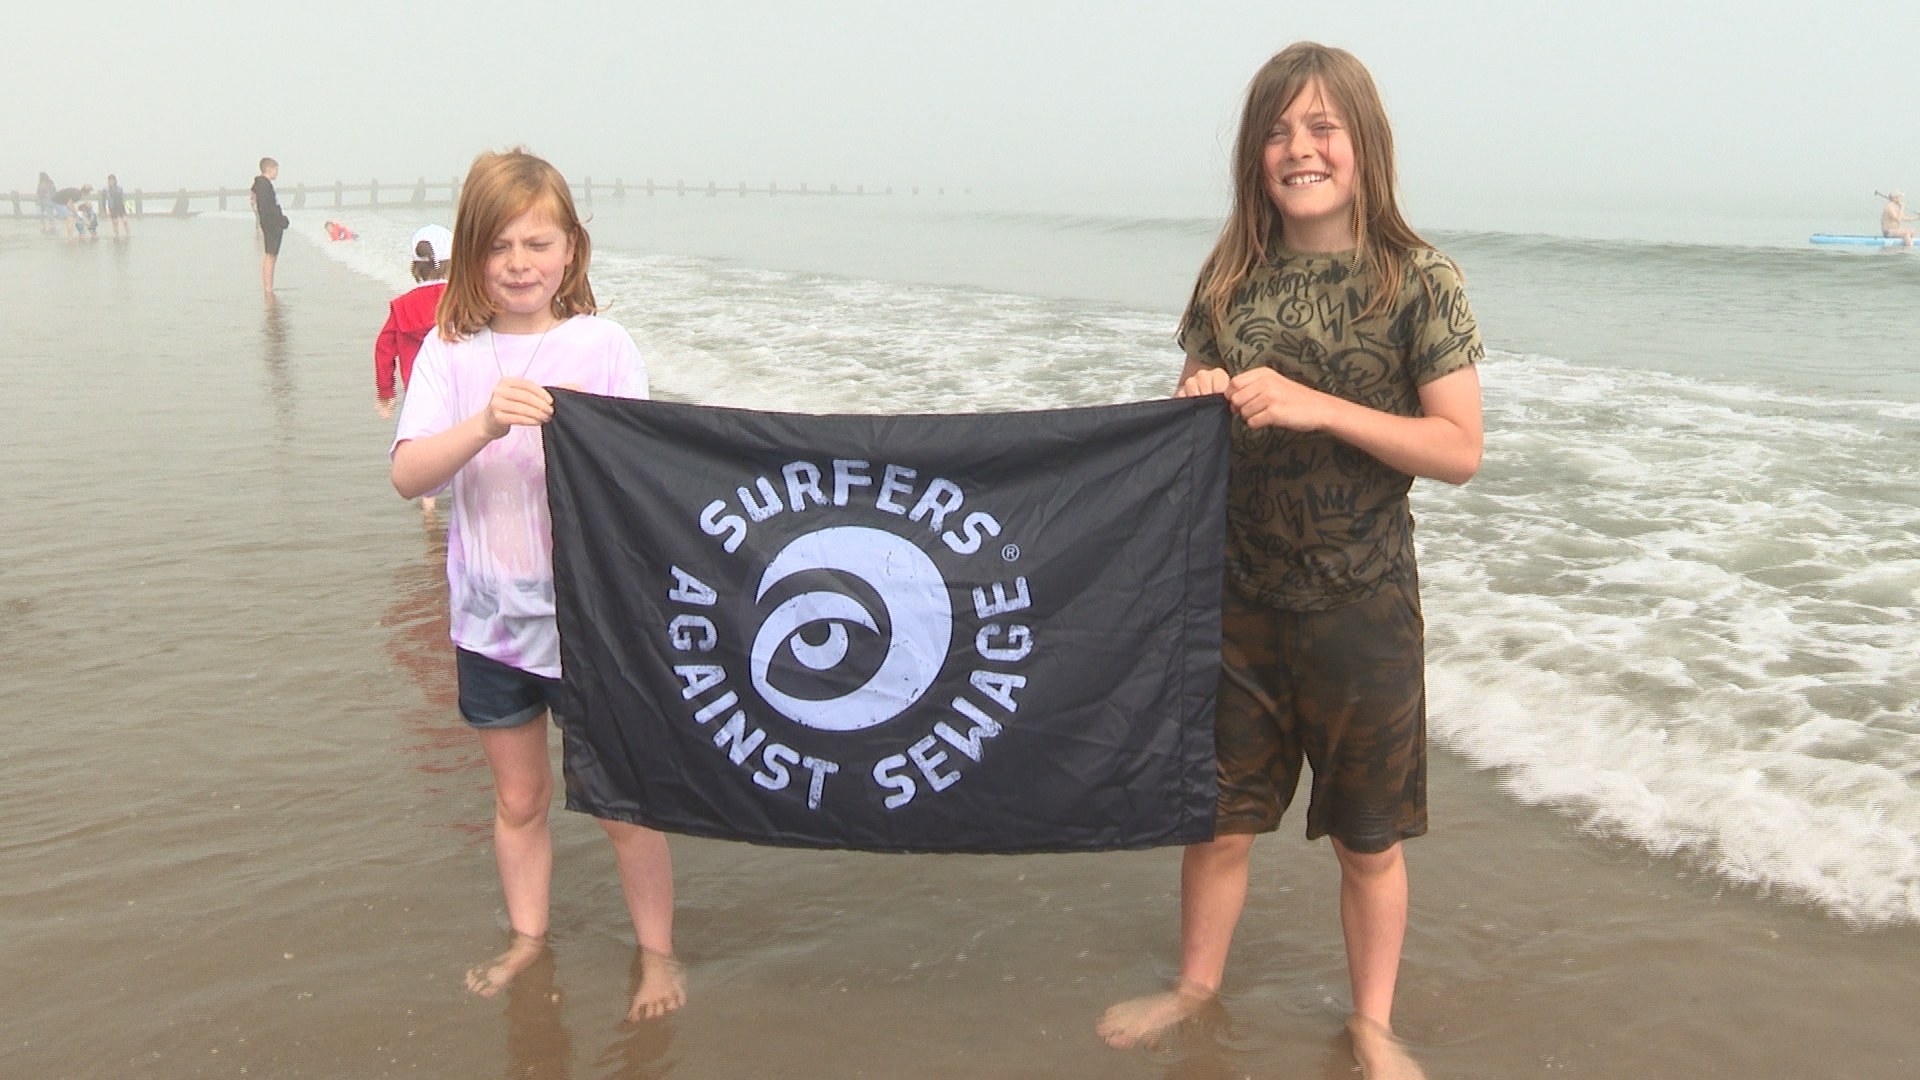 The day of action was organised by Surfers Against Sewage in reaction to rising levels of pollution in rivers and seas.